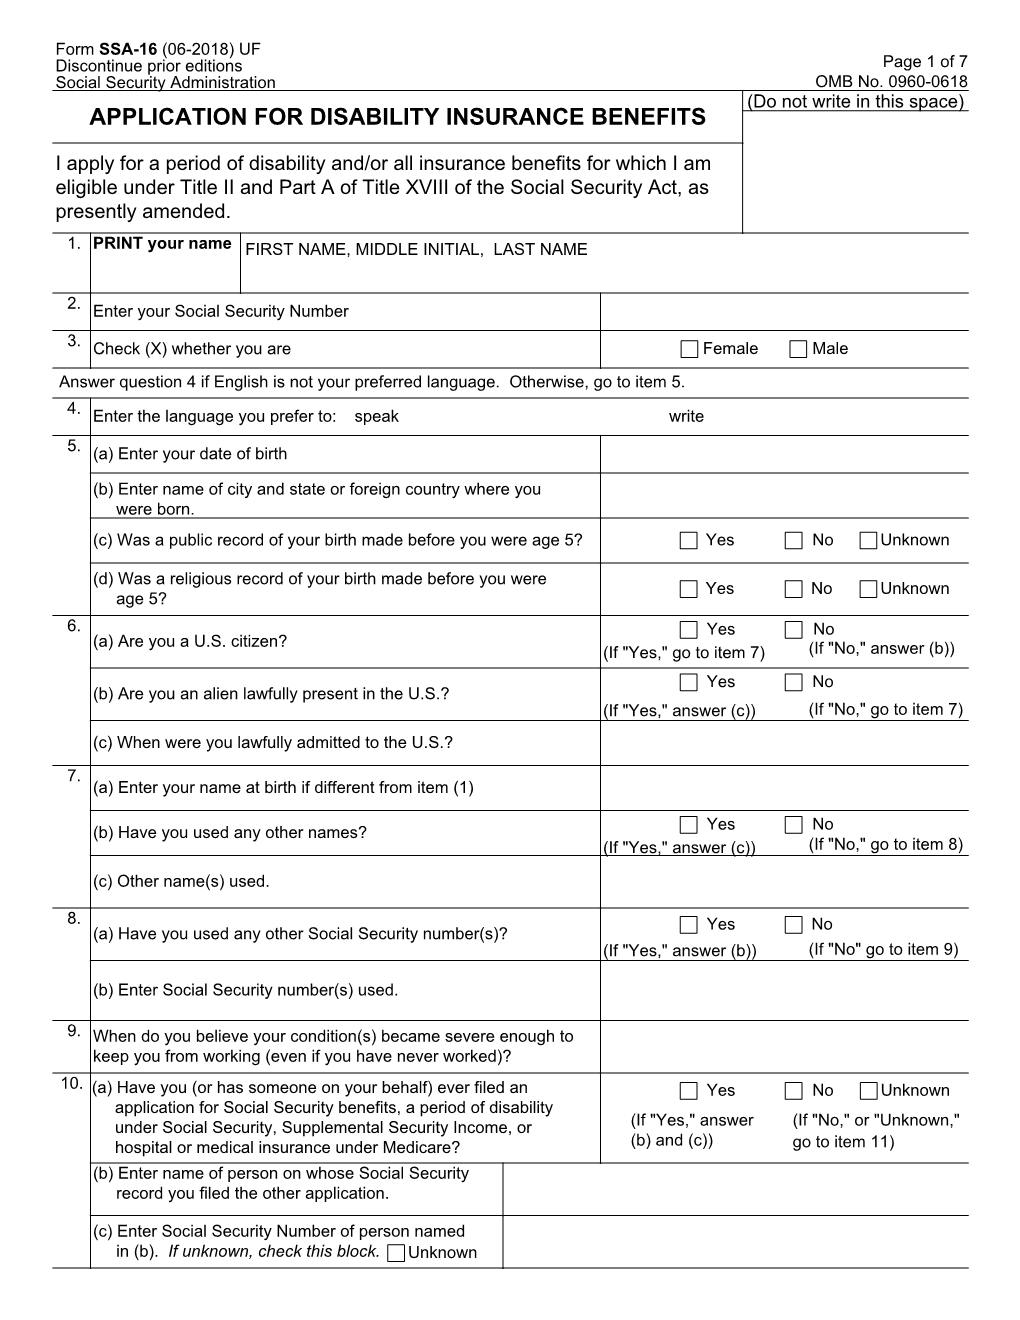 Form SSA-16 (06-2018) UF Discontinue Prior Editions Page 1 of 7 Social Security Administration OMB No